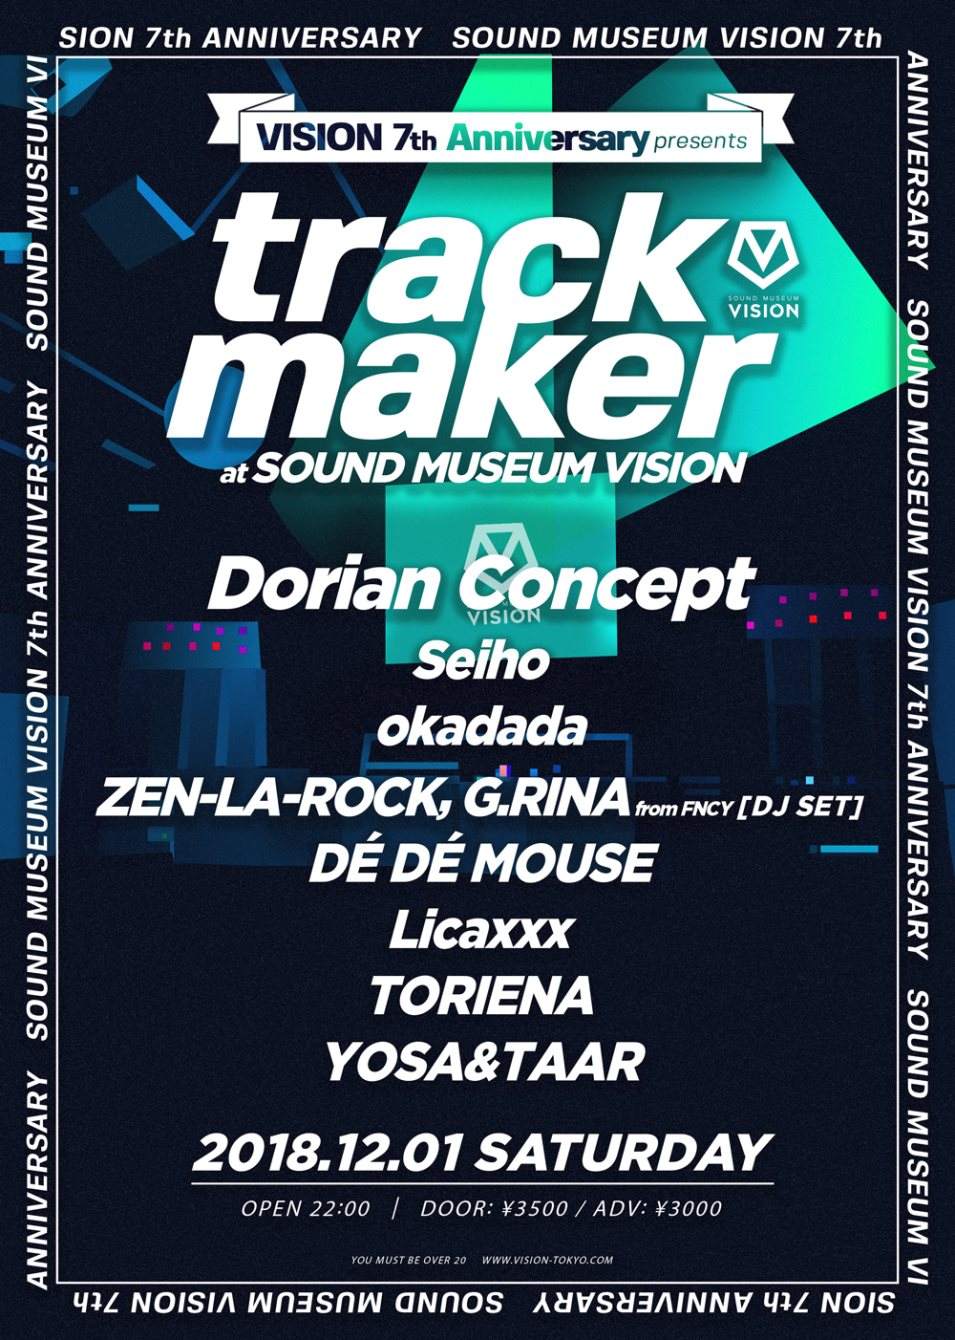 Vision 7th Anniversary 'trackmaker' - フライヤー表